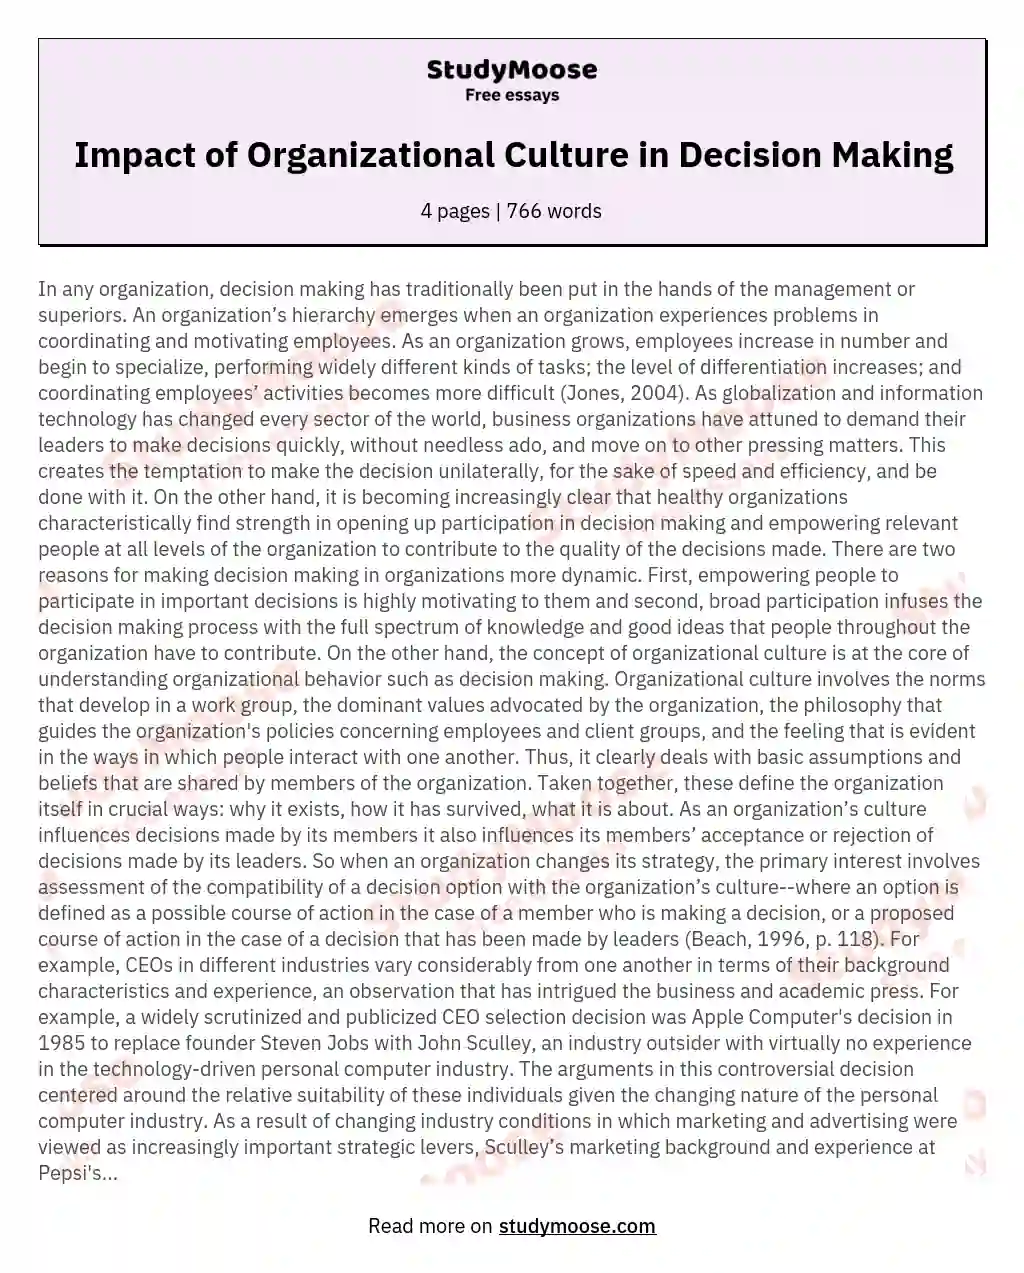 Impact of Organizational Culture in Decision Making essay